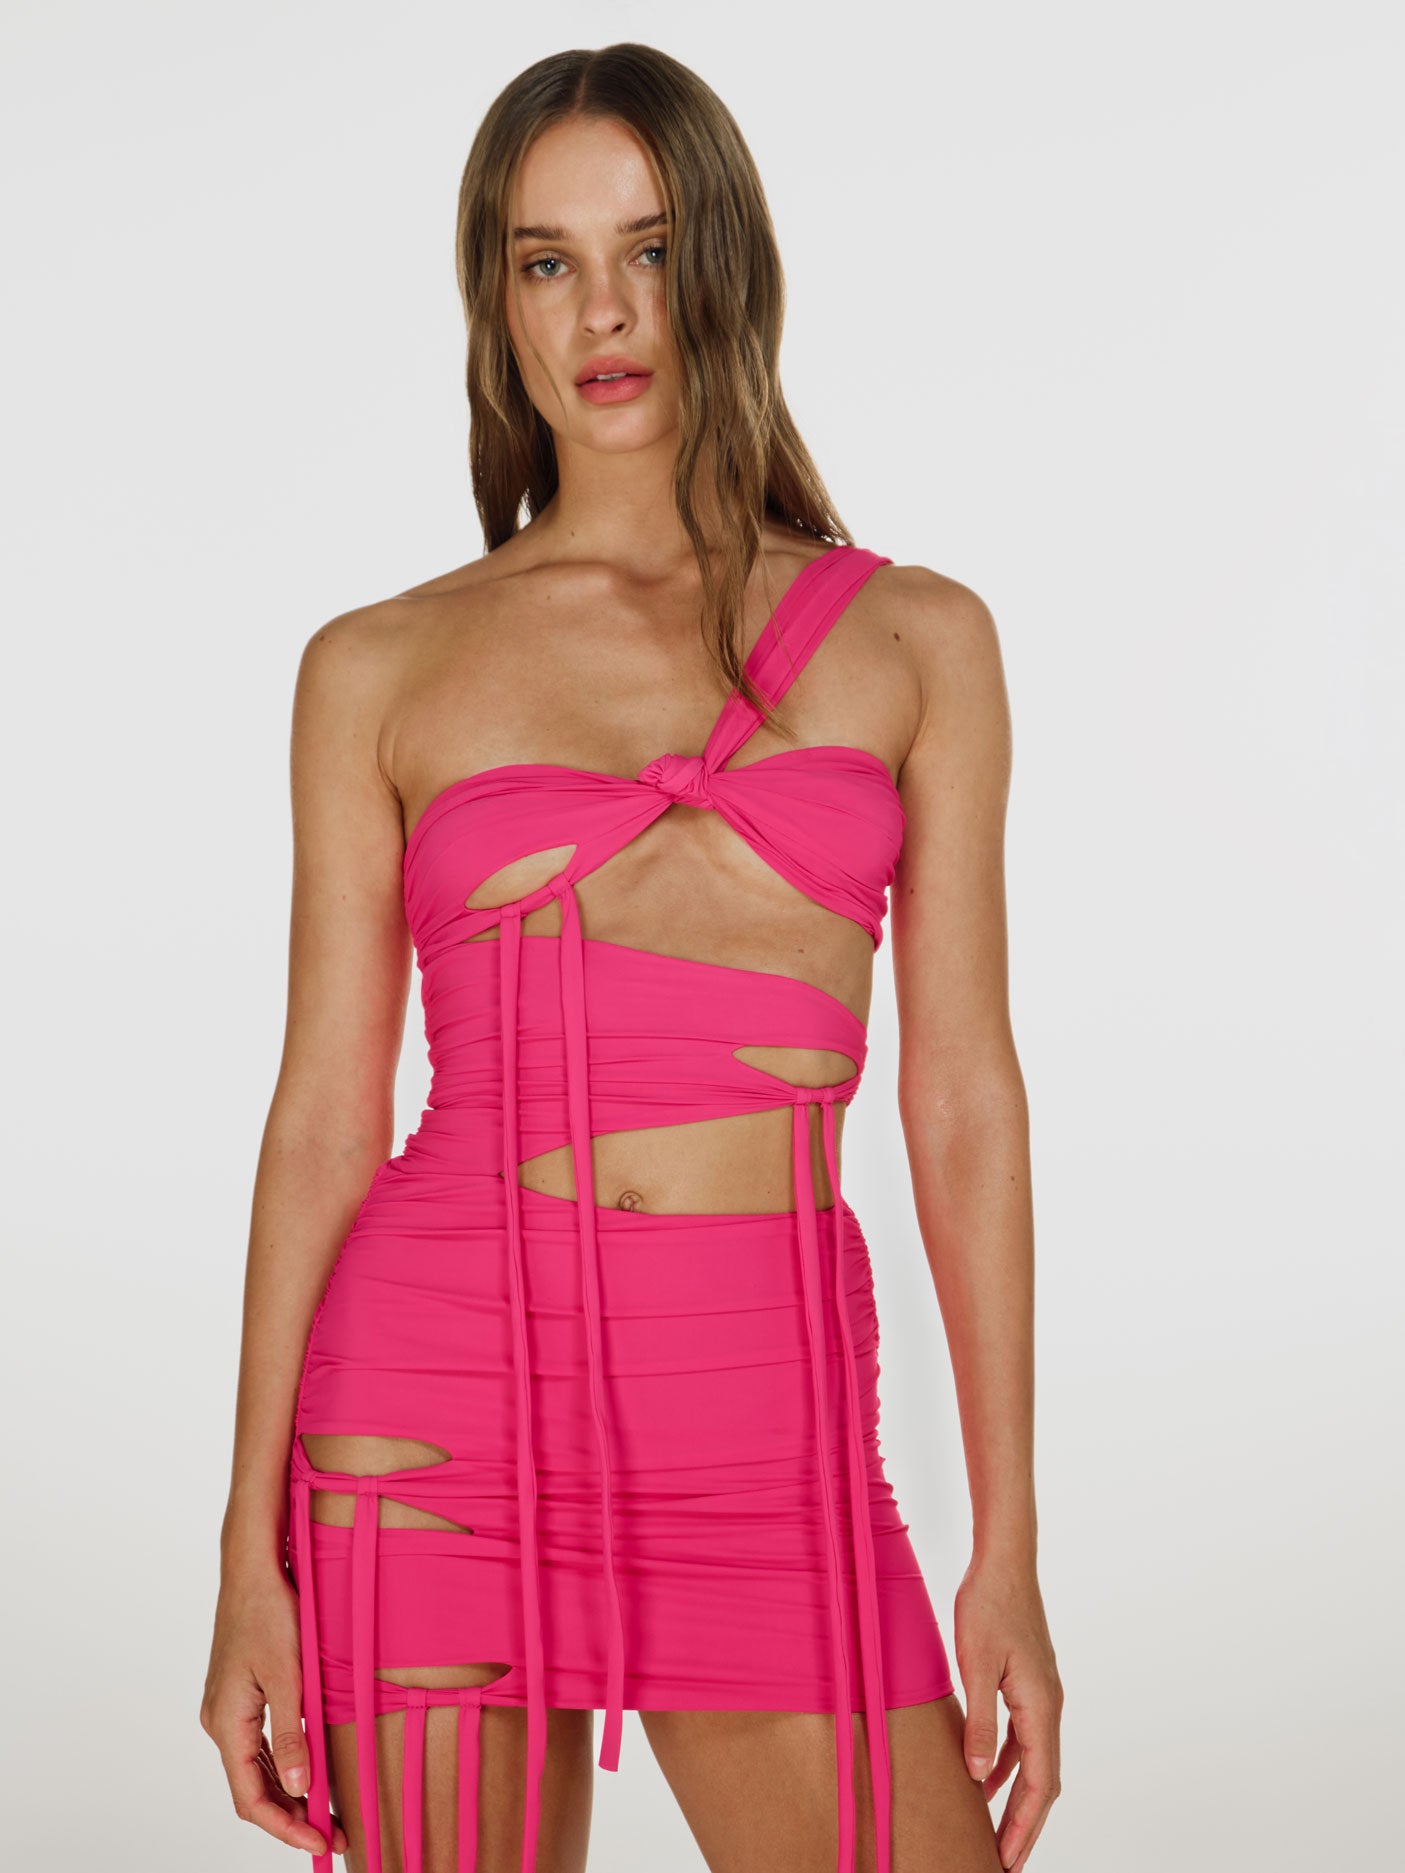 Cowboy shot of a girl in a pink one shoulder mini dress with extended laces, featuring horizontal cuts